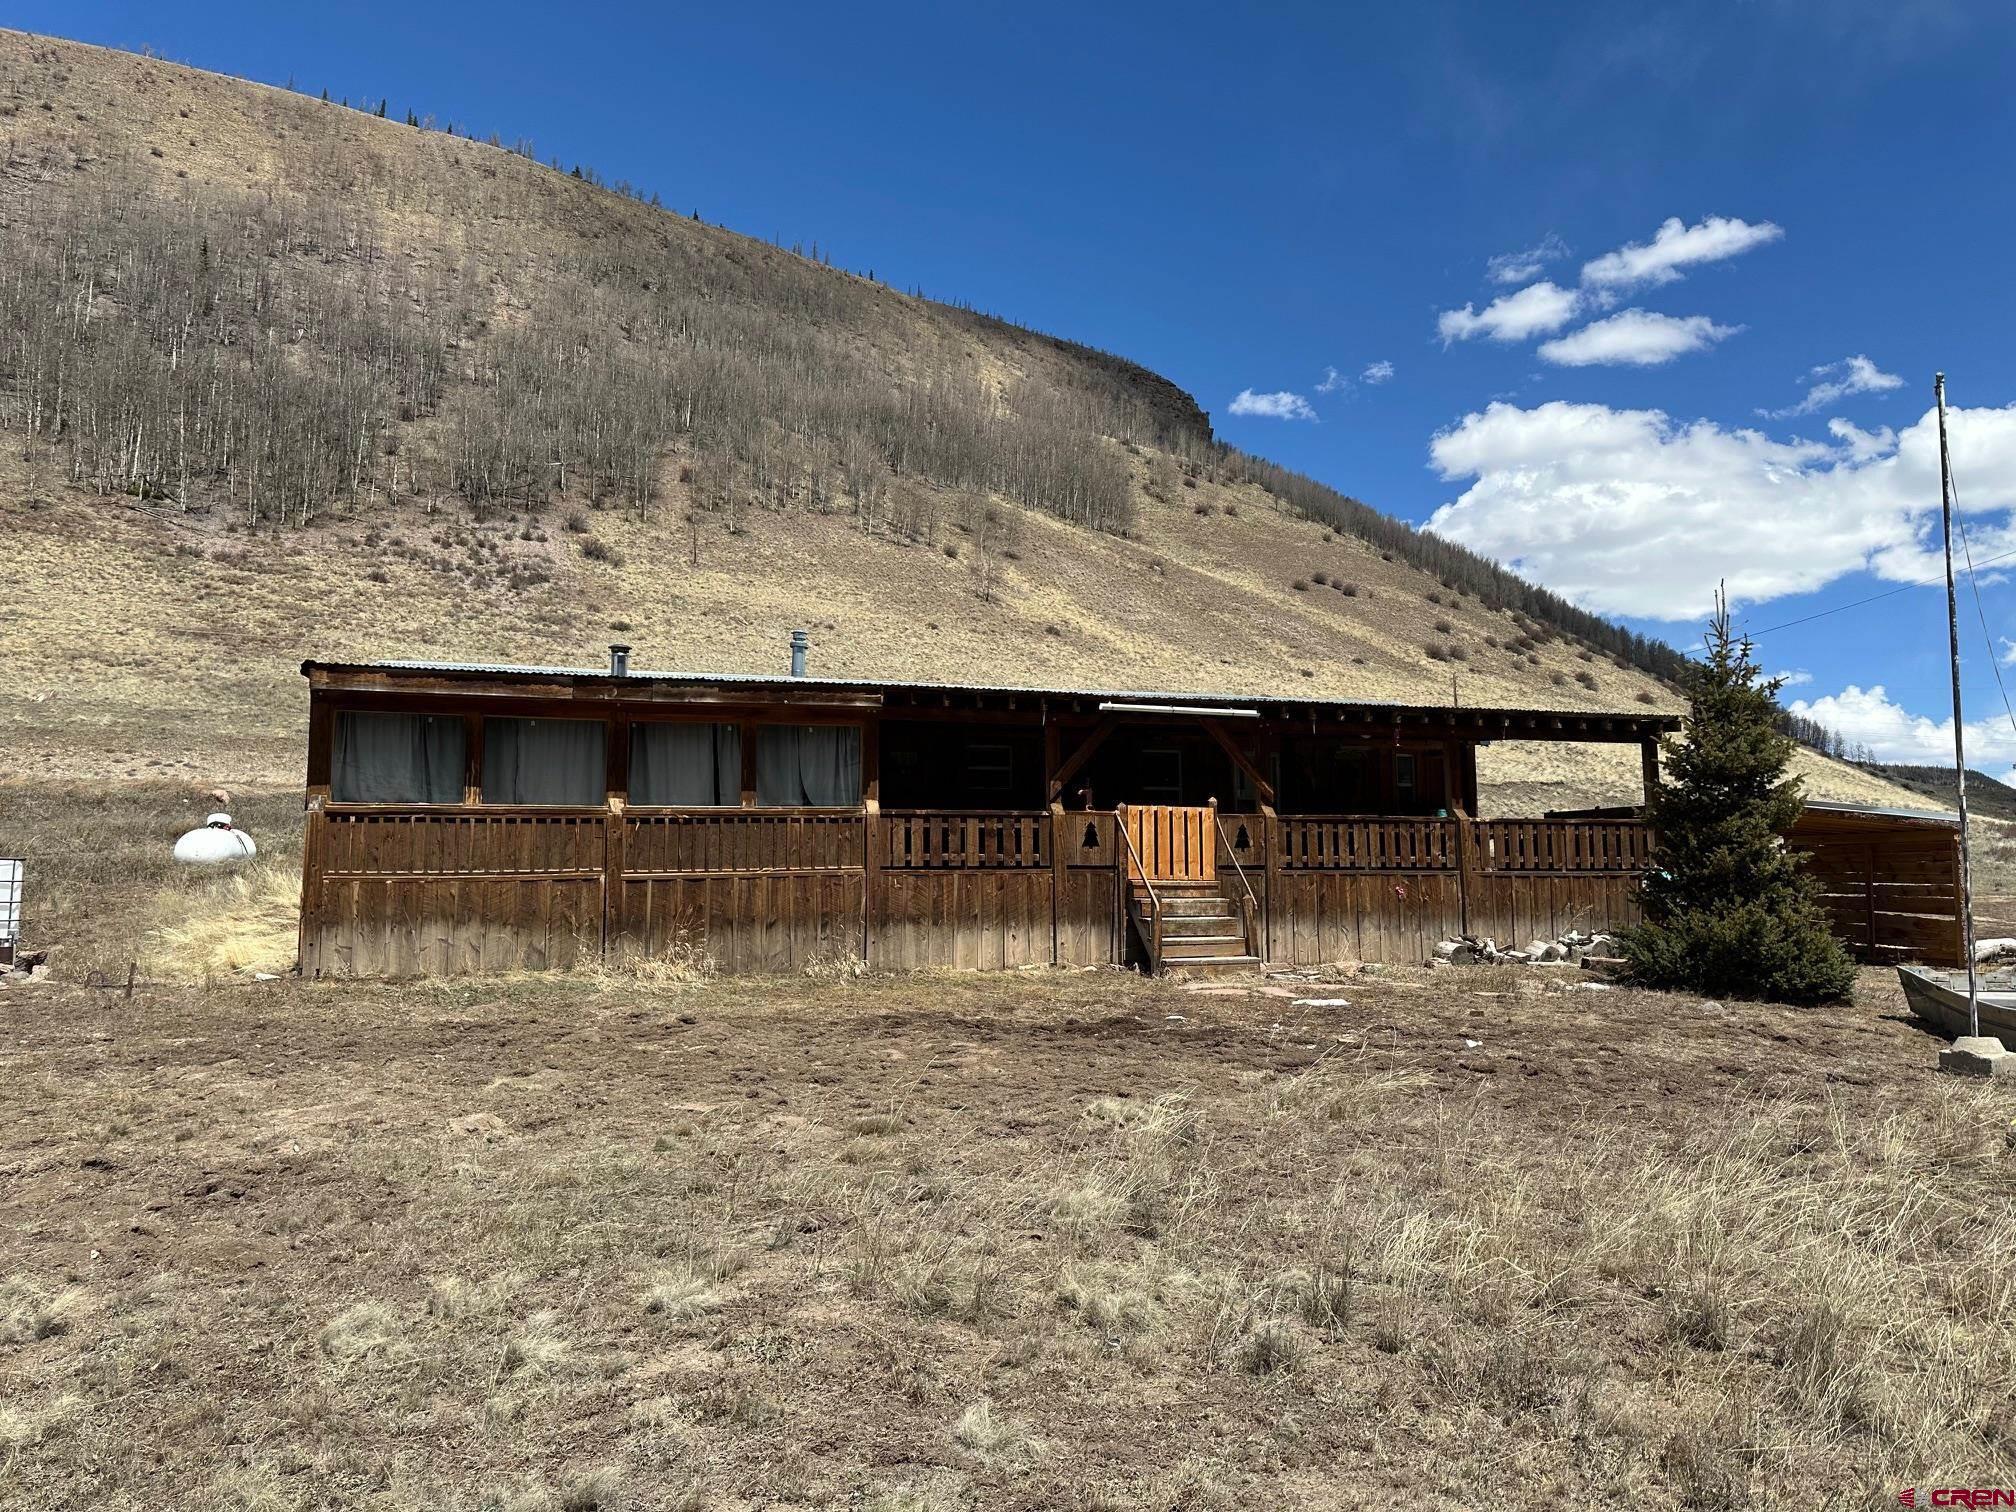 Photo of 4100 Usfs Road 515 #180 Hermit Lks #180 in Creede, CO